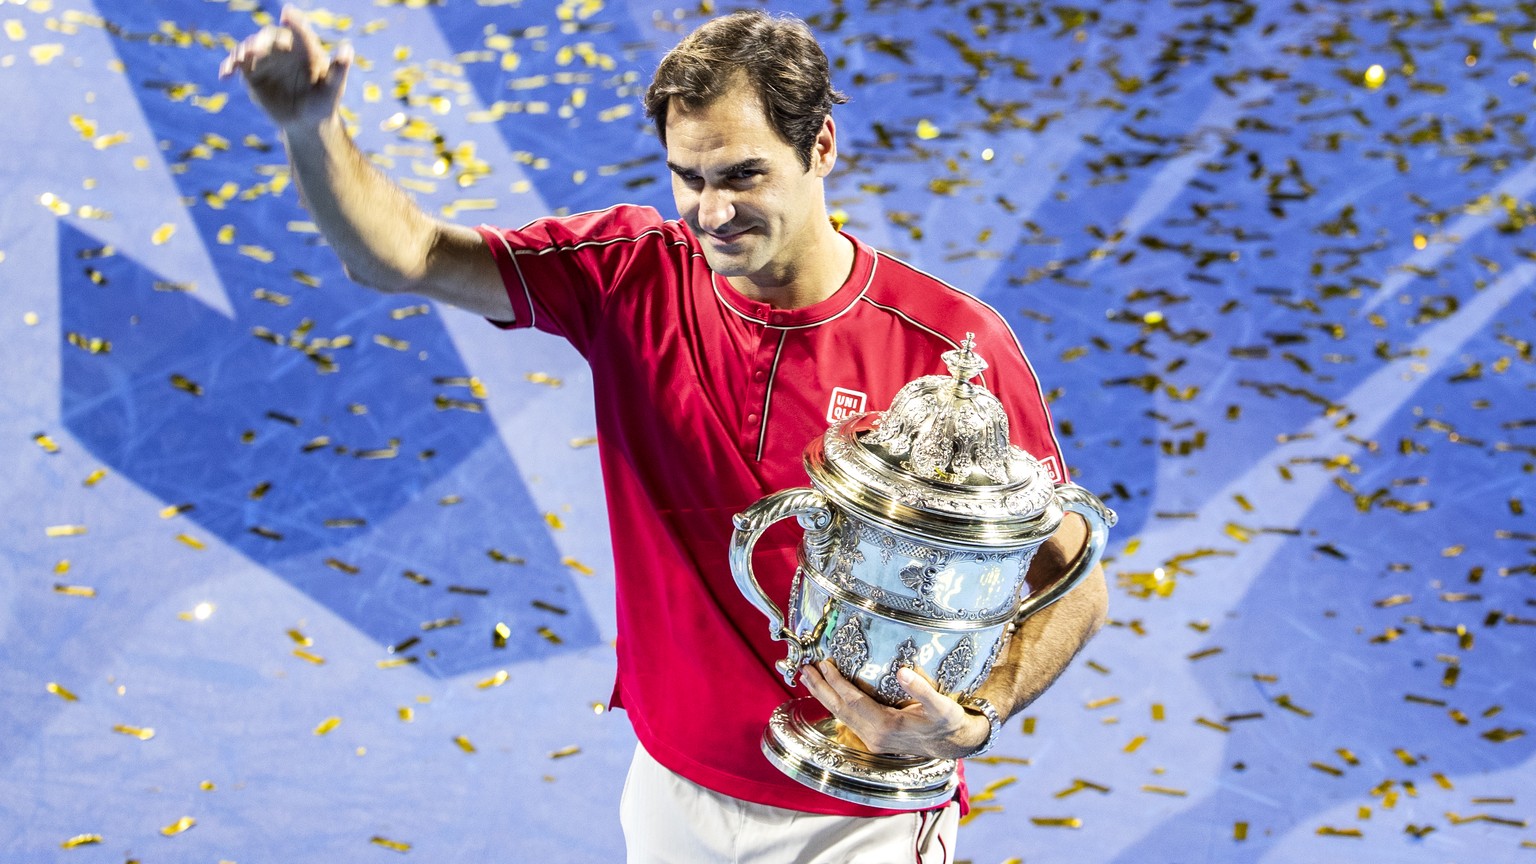 Roger Federer of Switzerland poses with his trophy after defeating Alex De Minaur of Australia after the final match at the Swiss Indoors tennis tournament at the St. Jakobshalle in Basel, Switzerland ...